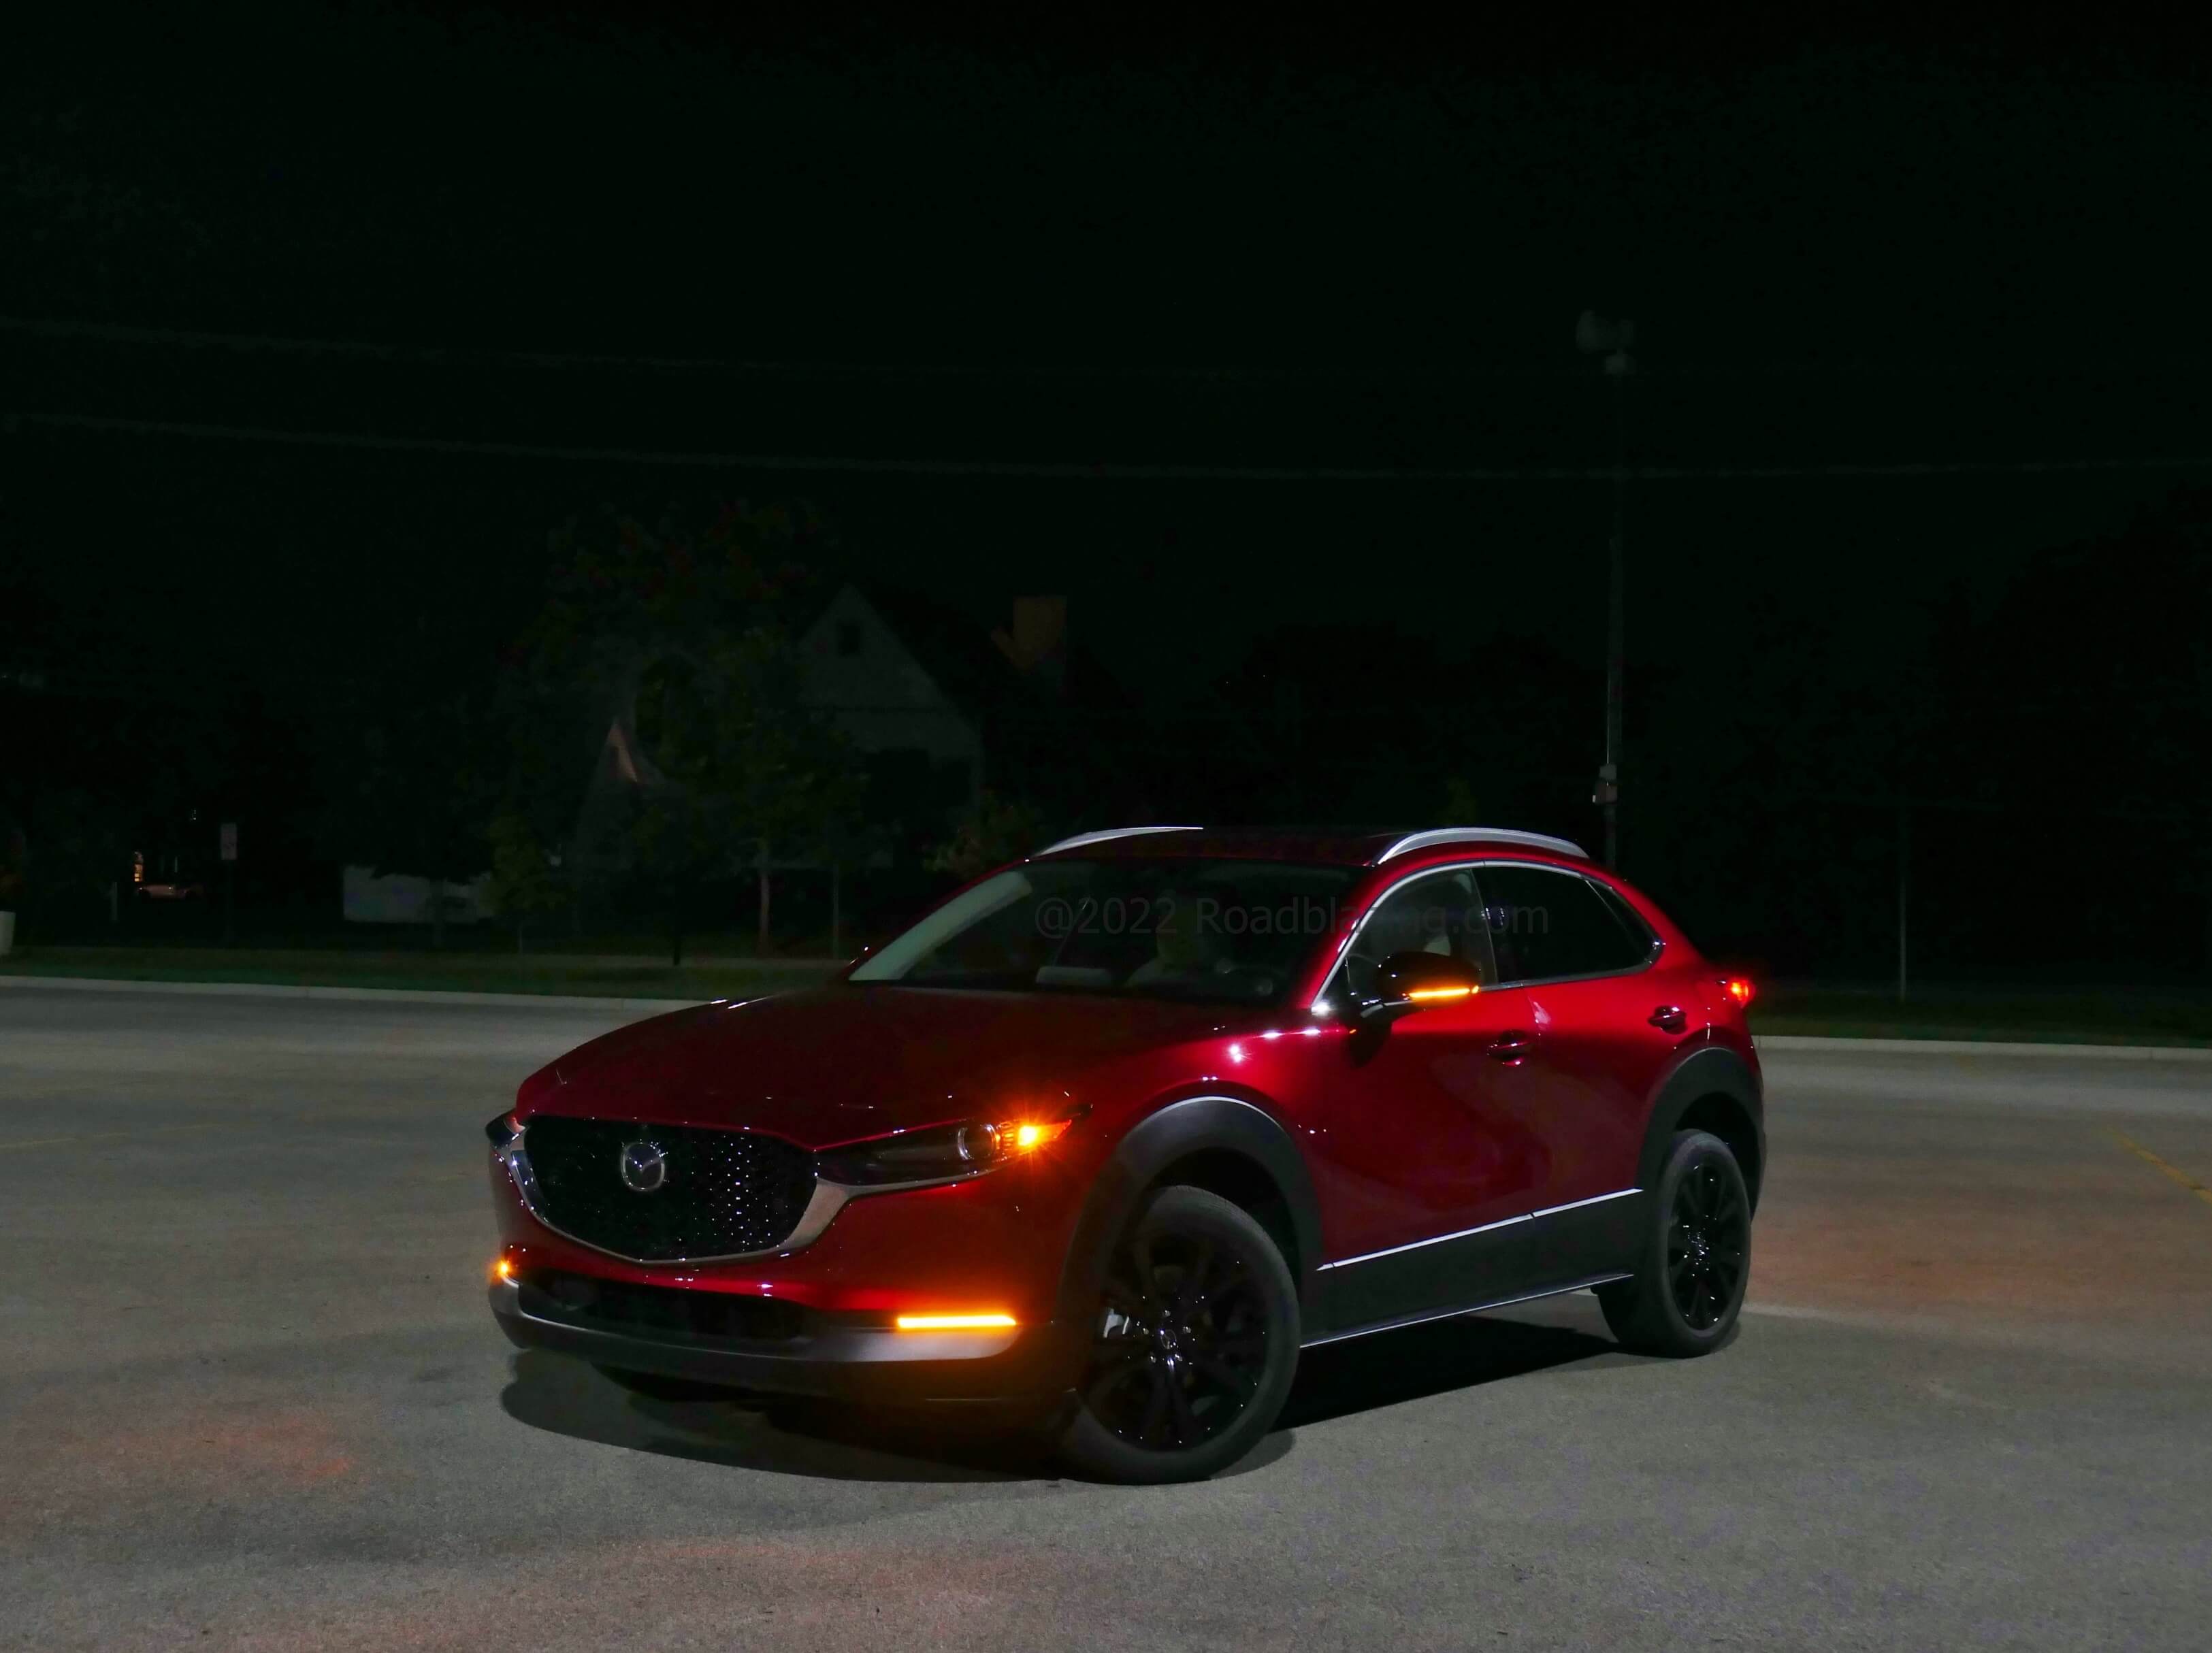 2022 Mazda CX-30 2.5 Turbo AWD: Soul Red Crystal Metallic flows spectacularly sanguine at night